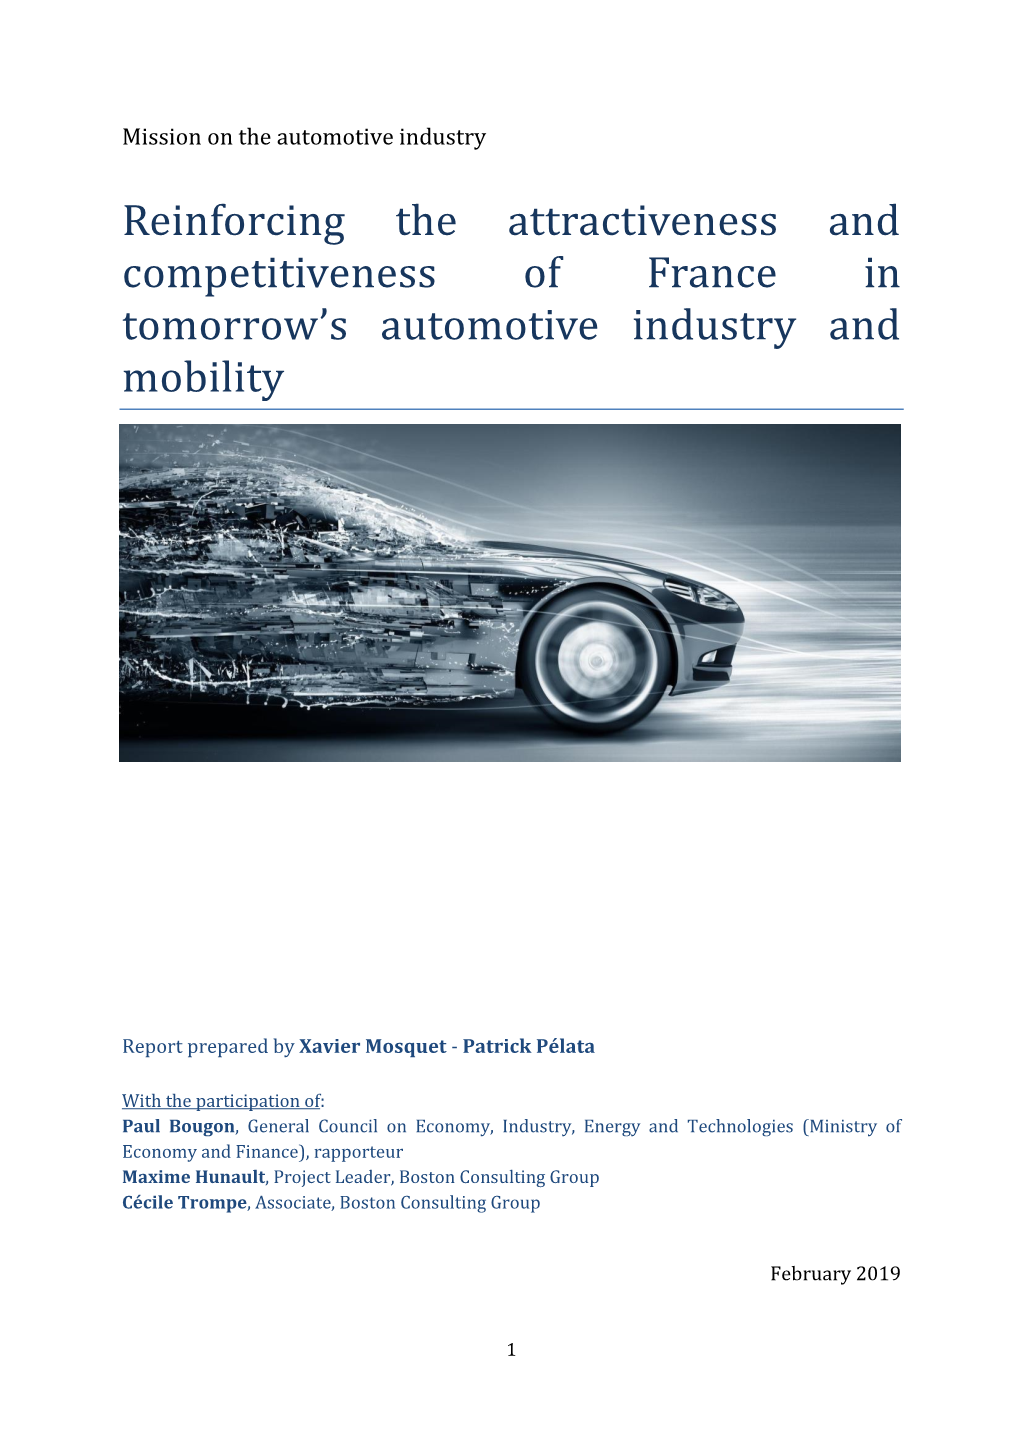 Reinforcing the Attractiveness and Competitiveness of France in Tomorrow’S Automotive Industry and Mobility